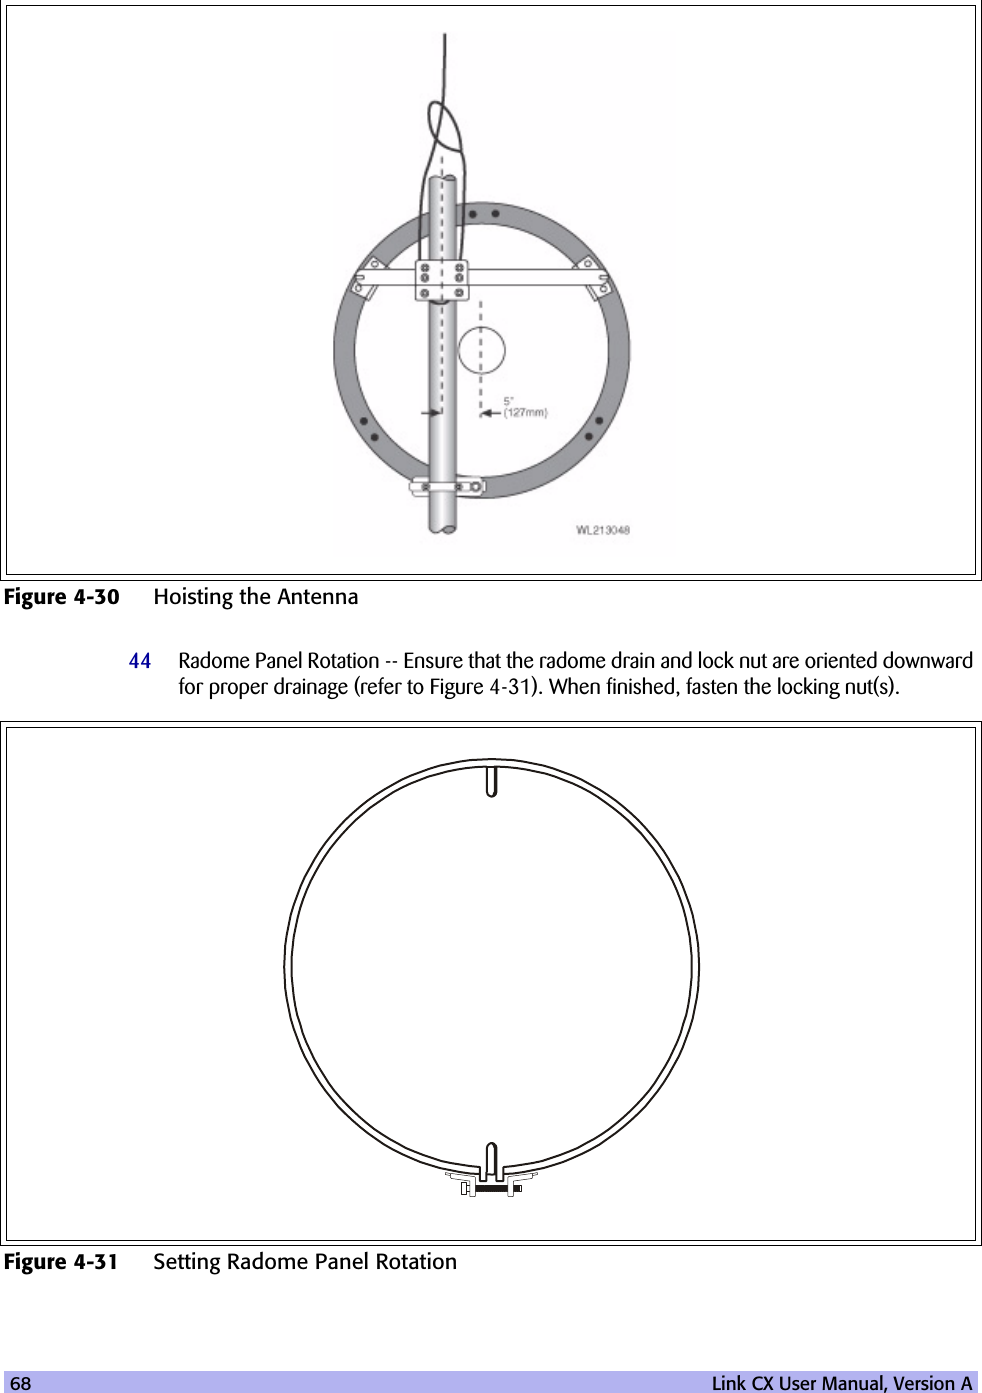 68   Link CX User Manual, Version A44 Radome Panel Rotation -- Ensure that the radome drain and lock nut are oriented downward for proper drainage (refer to Figure 4-31). When finished, fasten the locking nut(s).Figure 4-30 Hoisting the AntennaFigure 4-31 Setting Radome Panel Rotation